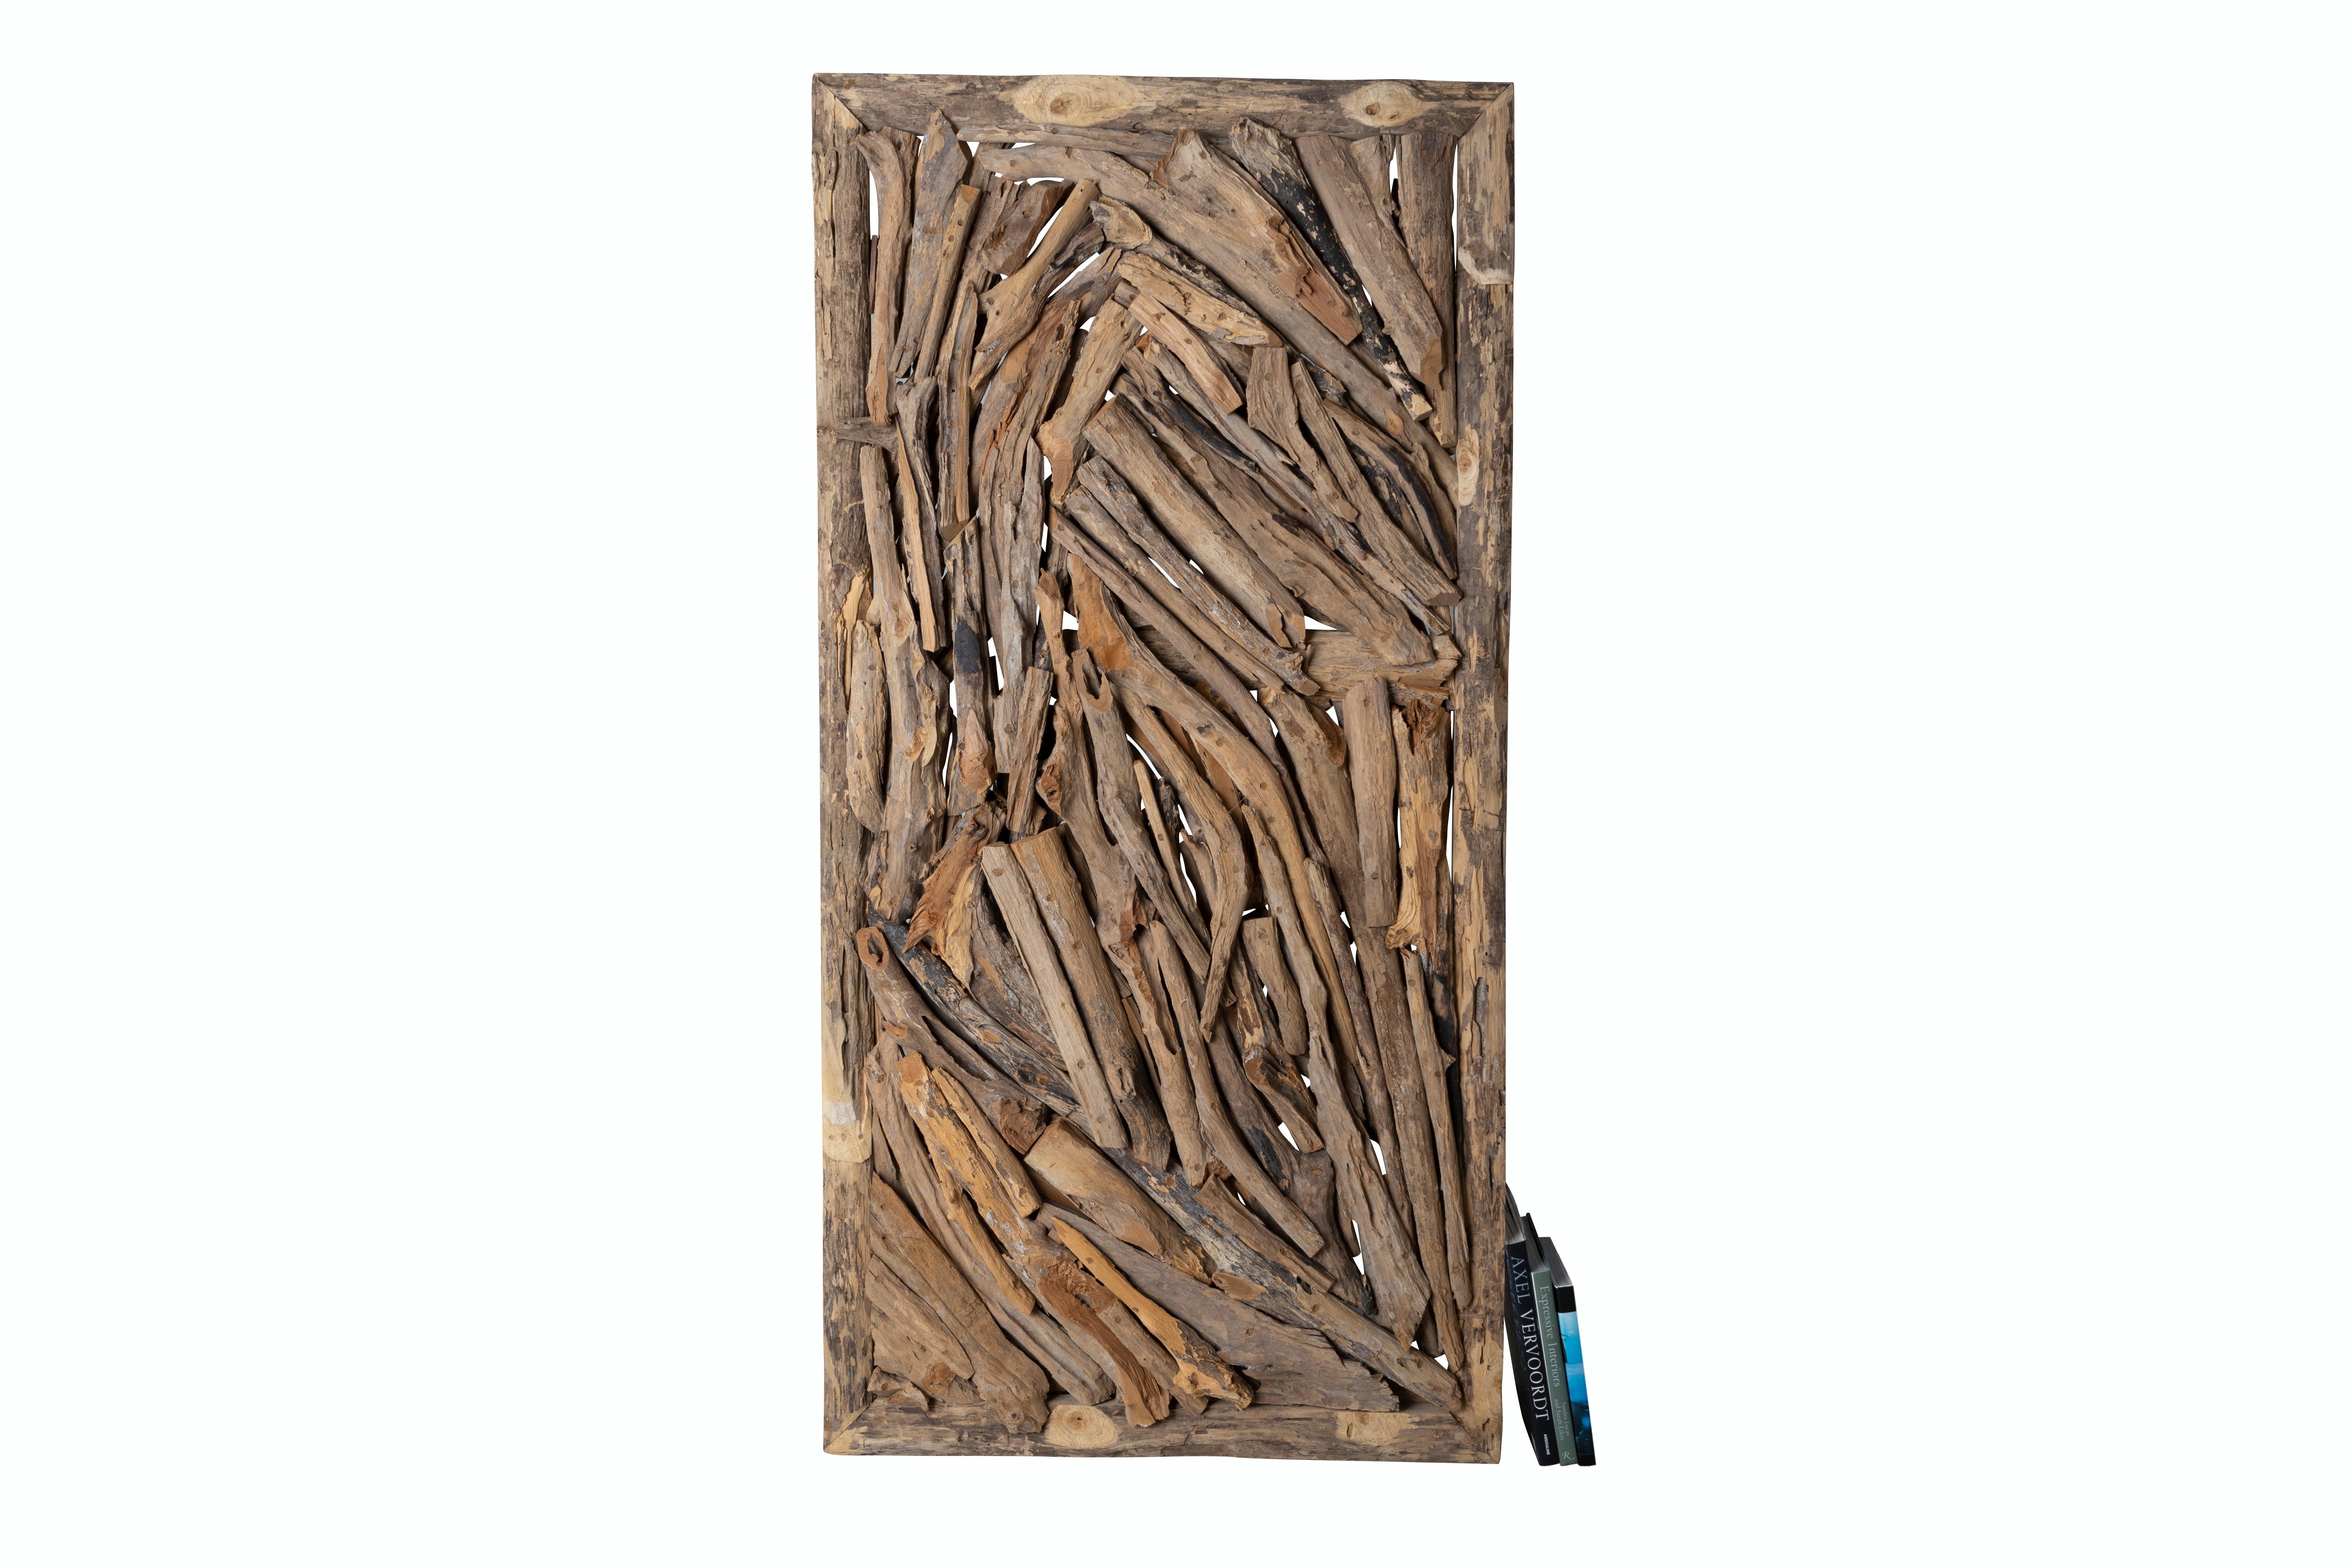 Dramatic and textured, these large driftwood panels are made from the organic shapes of twisted driftwood. Wiring at back make it easy to mount on the wall for a one-of-a-kind contemporary focal point. This large driftwood panel is woven together to